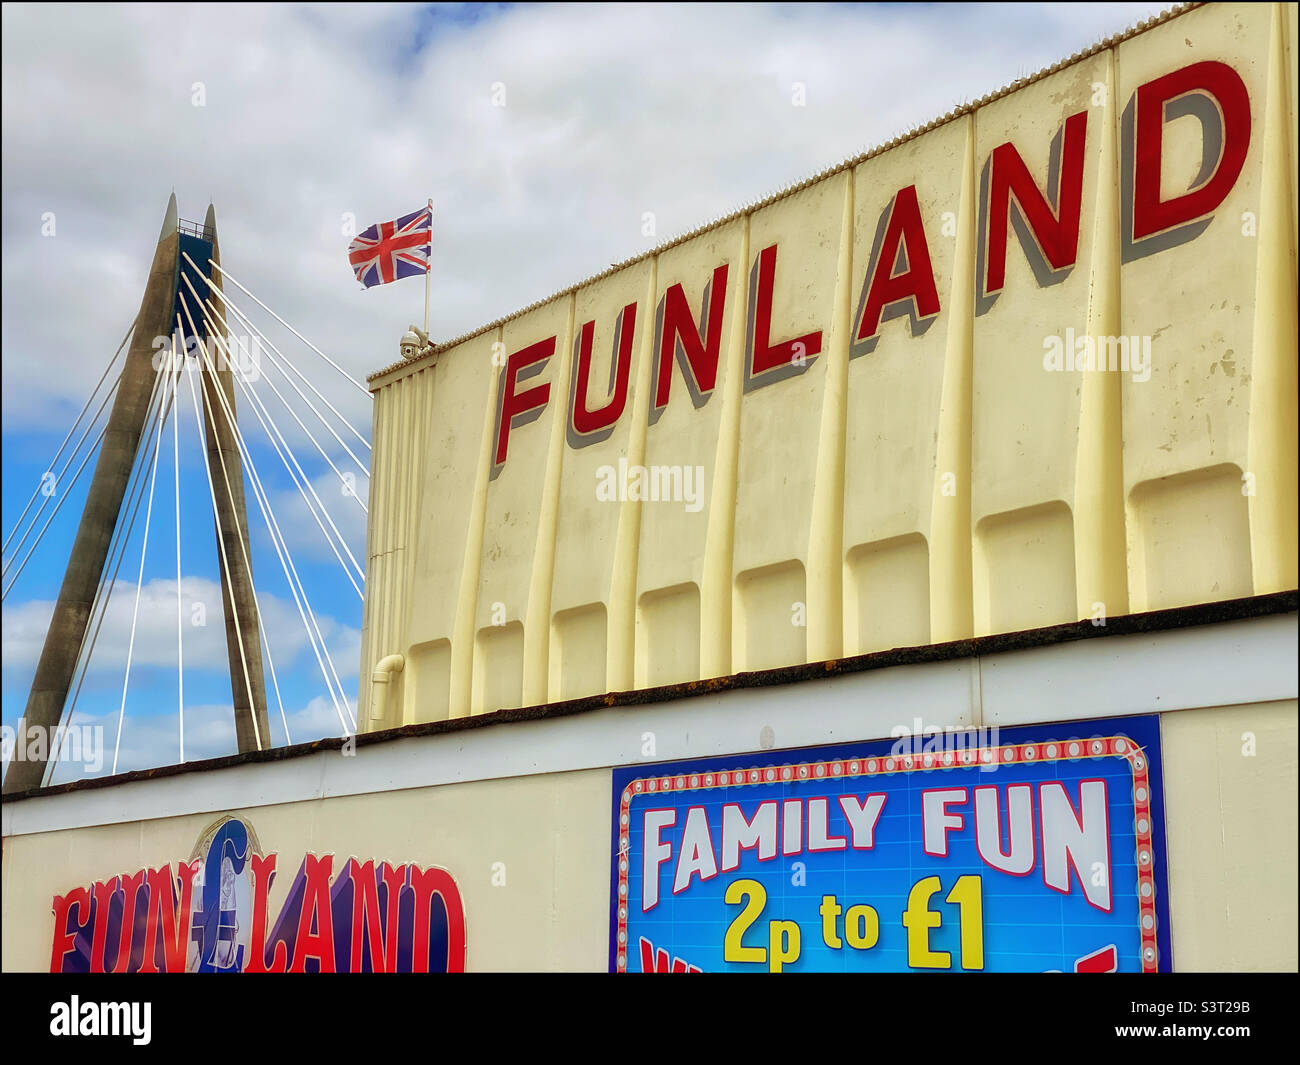 “FUNLAND”   FUN£LAND.    FAMILY FUN 2p to £1. The FUNLAND building in Southport, Merseyside, Lancashire, England. Photo ©️ COLIN HOSKINS. Stock Photo